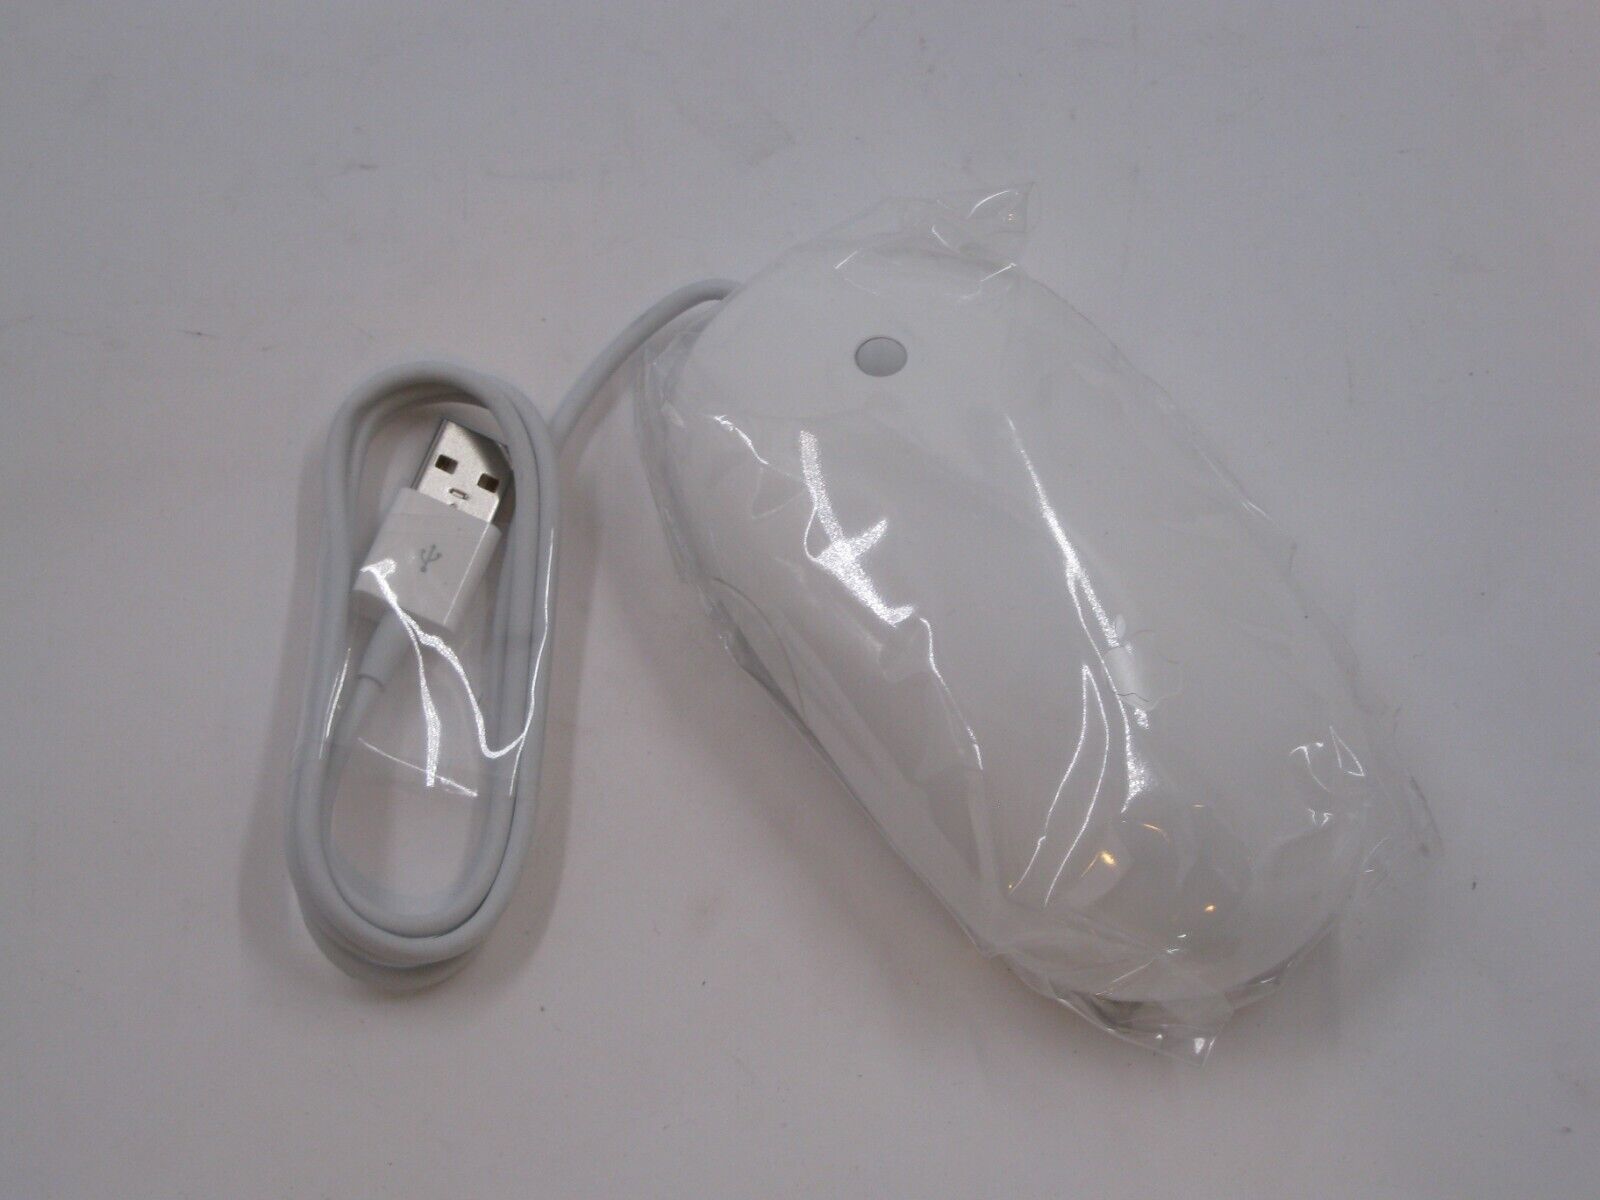 New Genuine Apple A1152 USB Wired Mighty Mouse Optical White EMC 2058